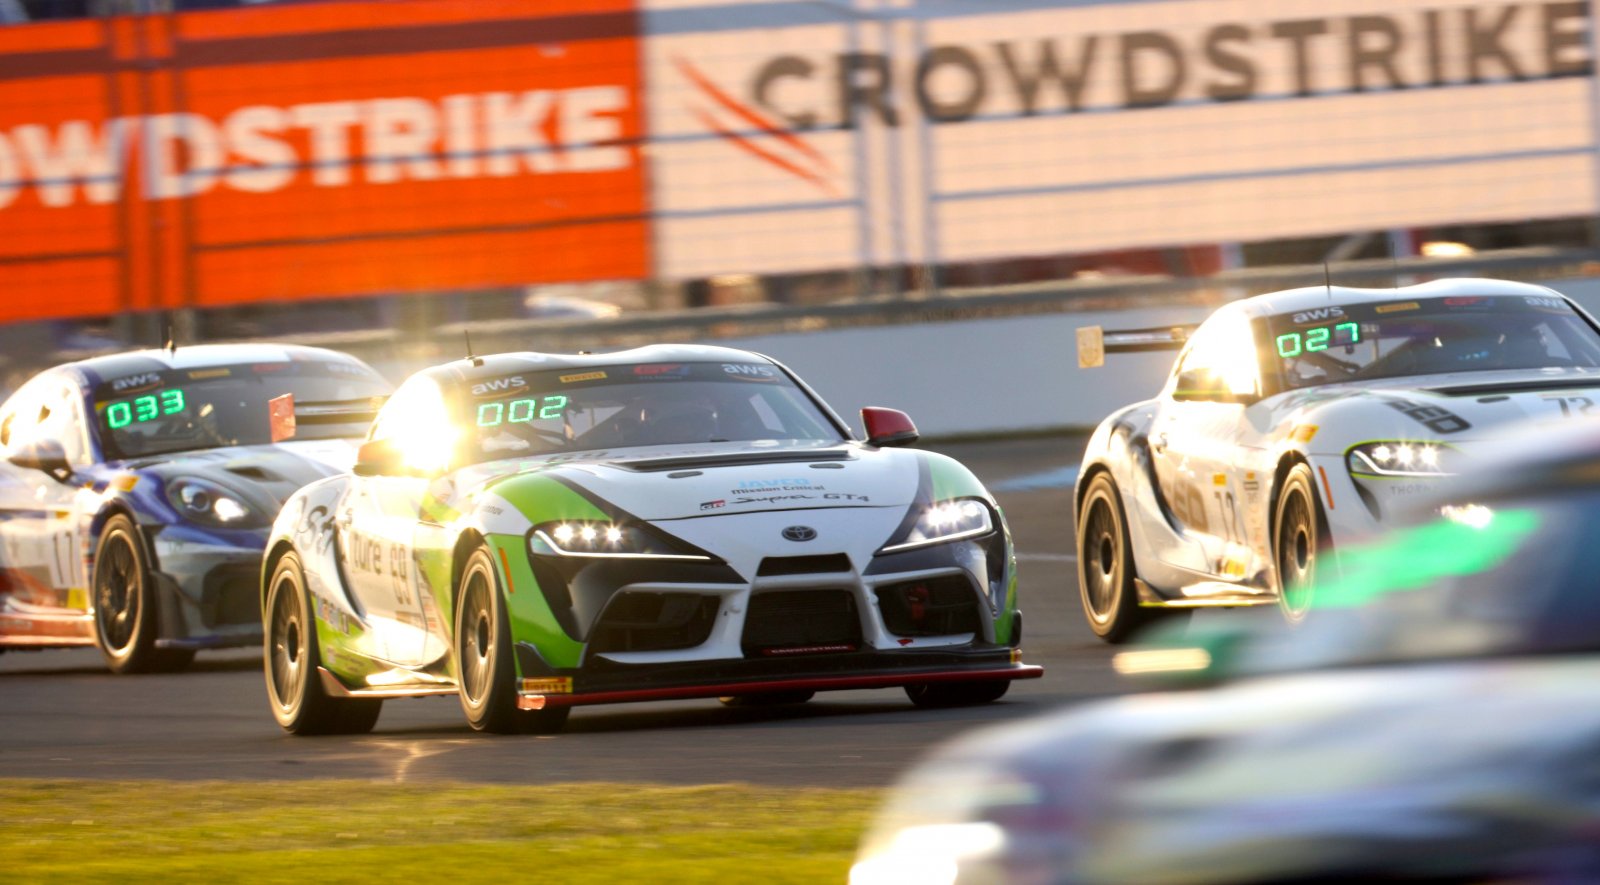 Auto Technic Racing, Smooge Racing  and Conquest Racing Quickest Across the Bricks in Practice Session 2 in Pirelli GT4 America